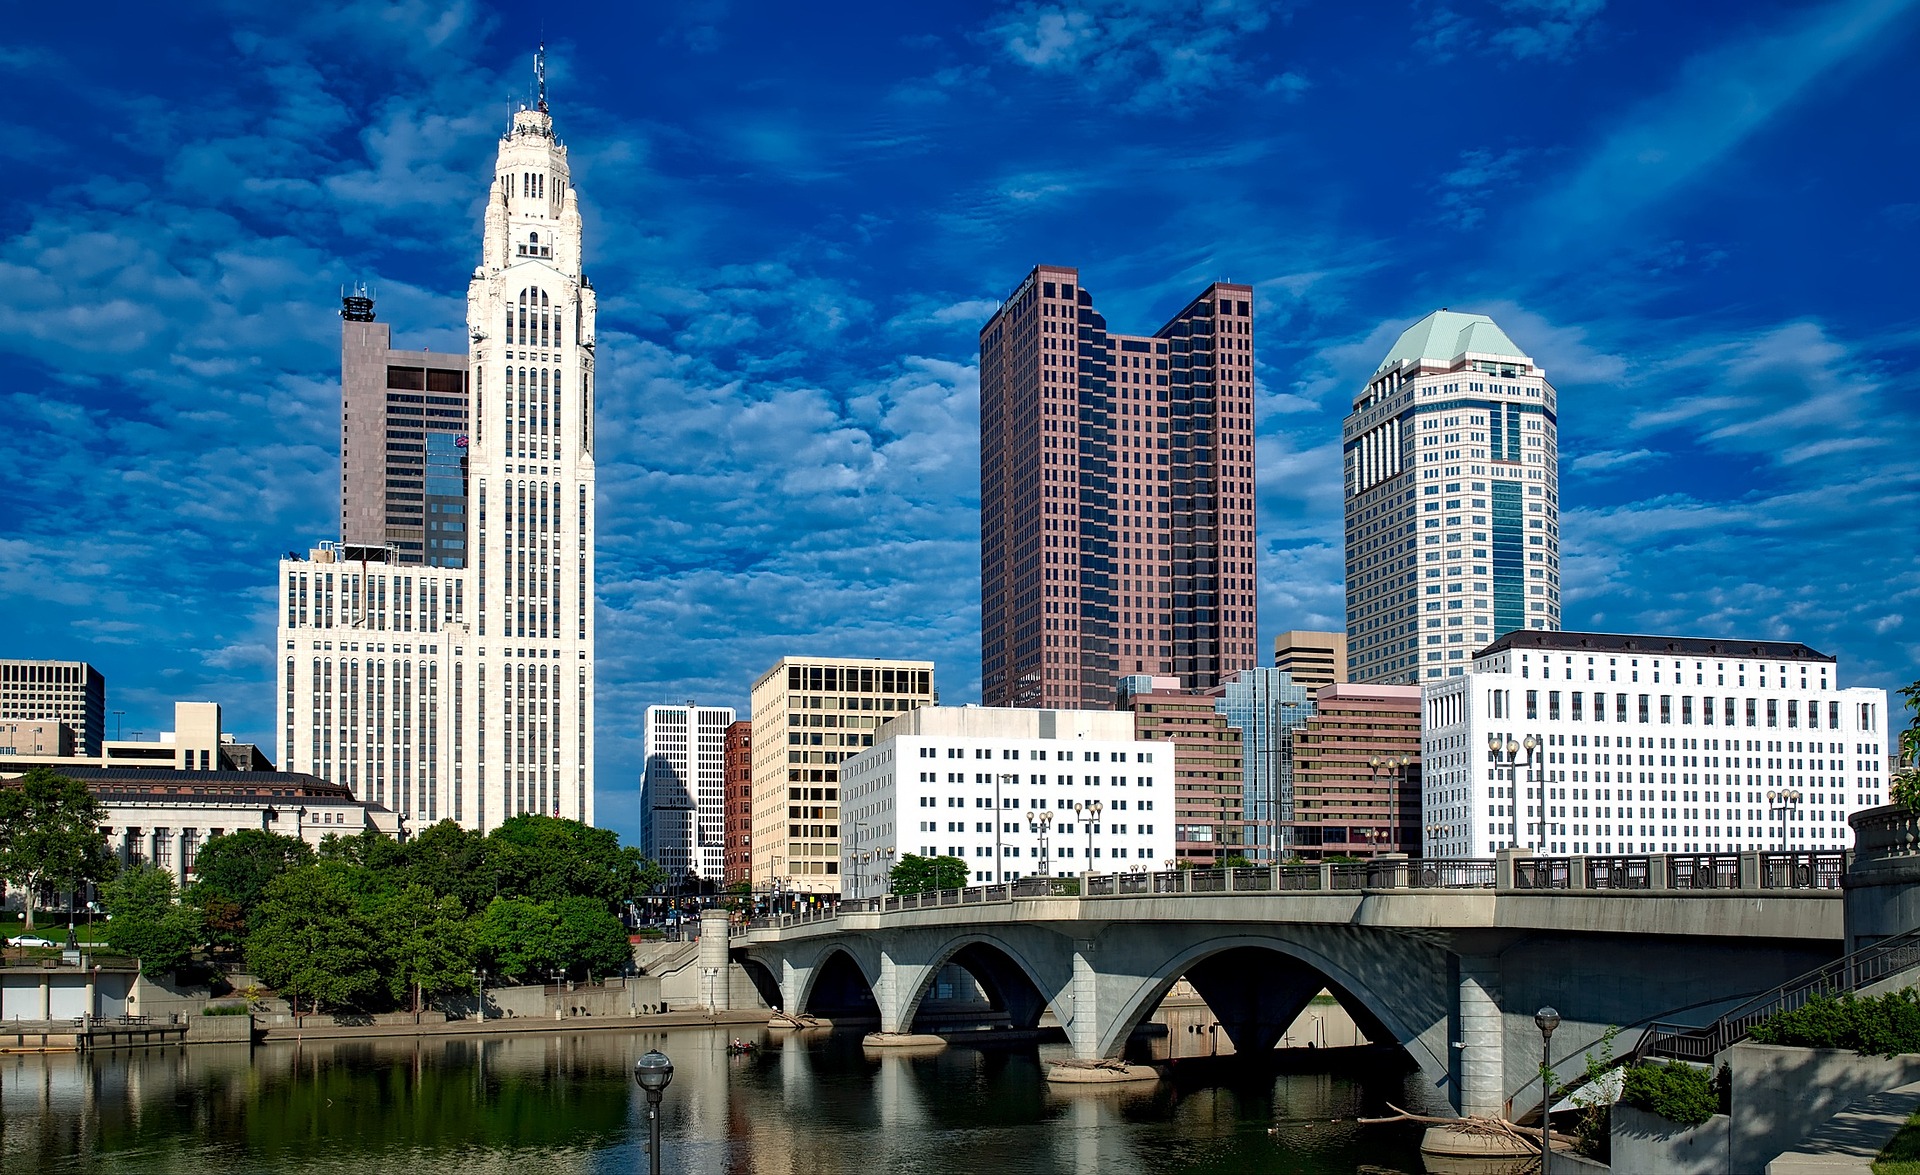 Elys secures conditional sports betting approval in Ohio